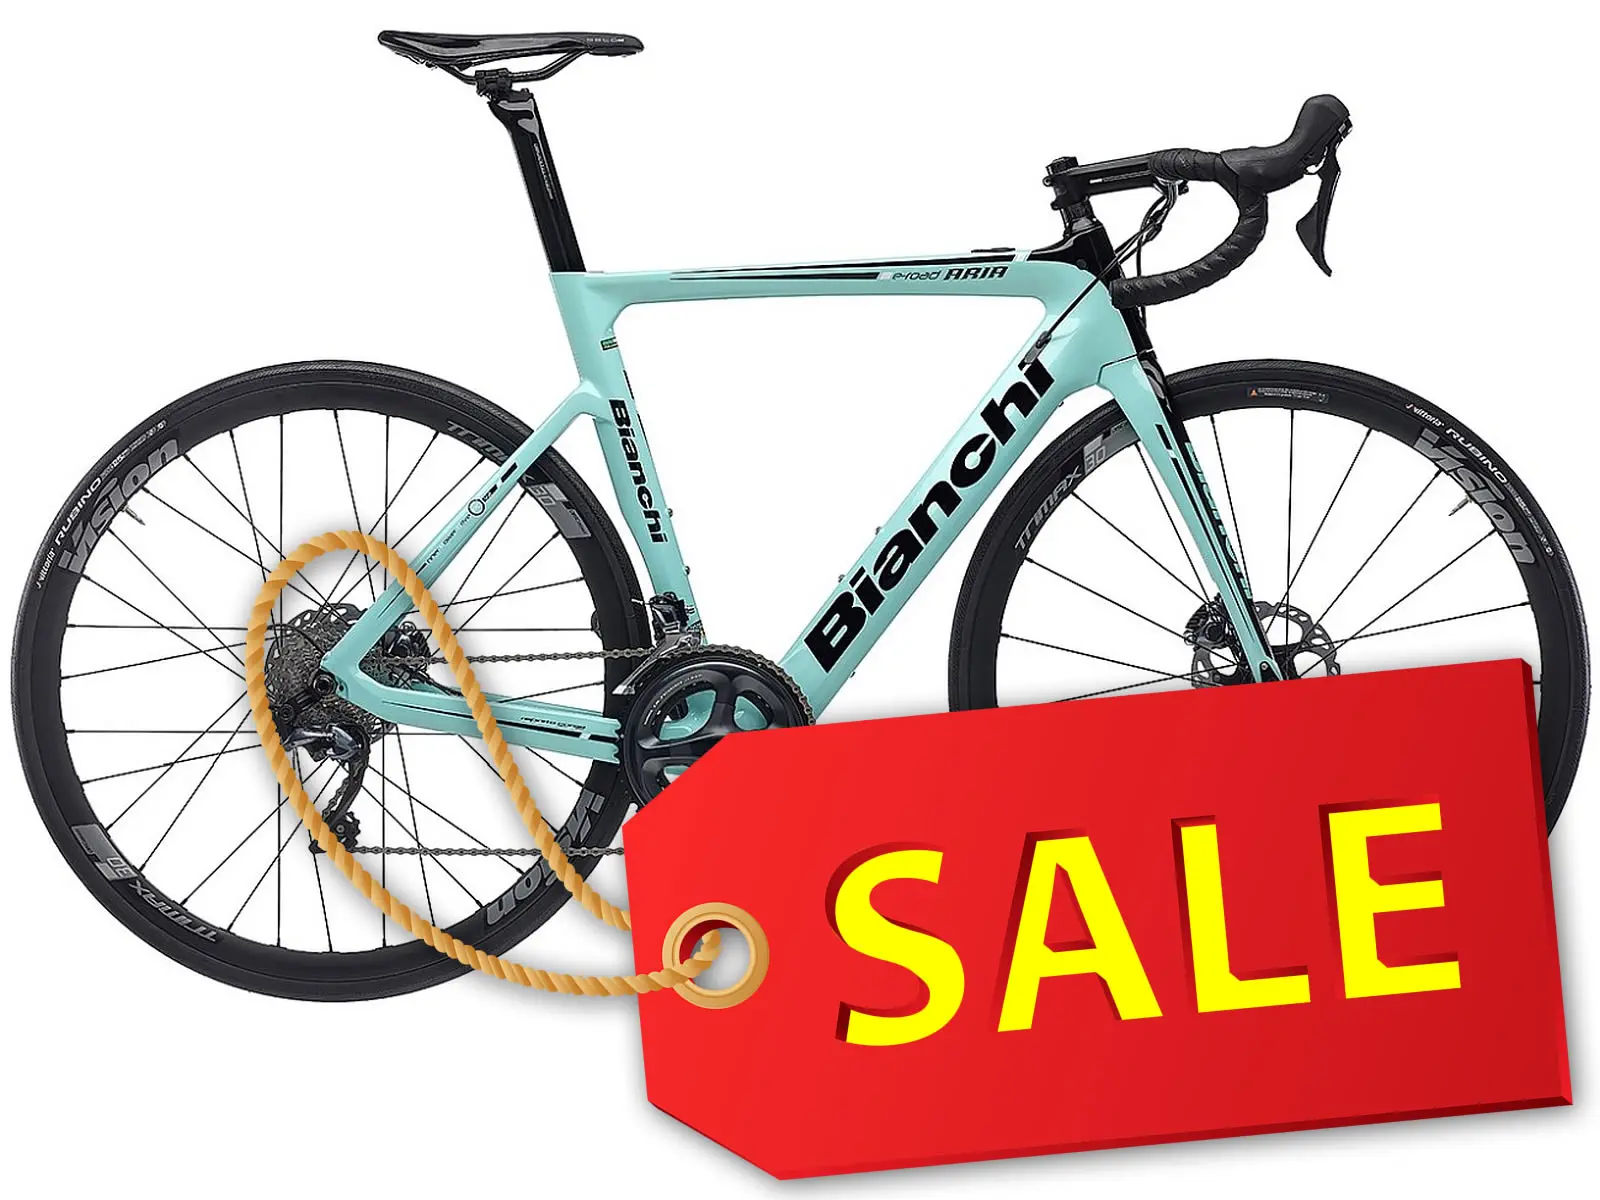 Cycling Deals - Handpicked cycling bargains for UK cyclists